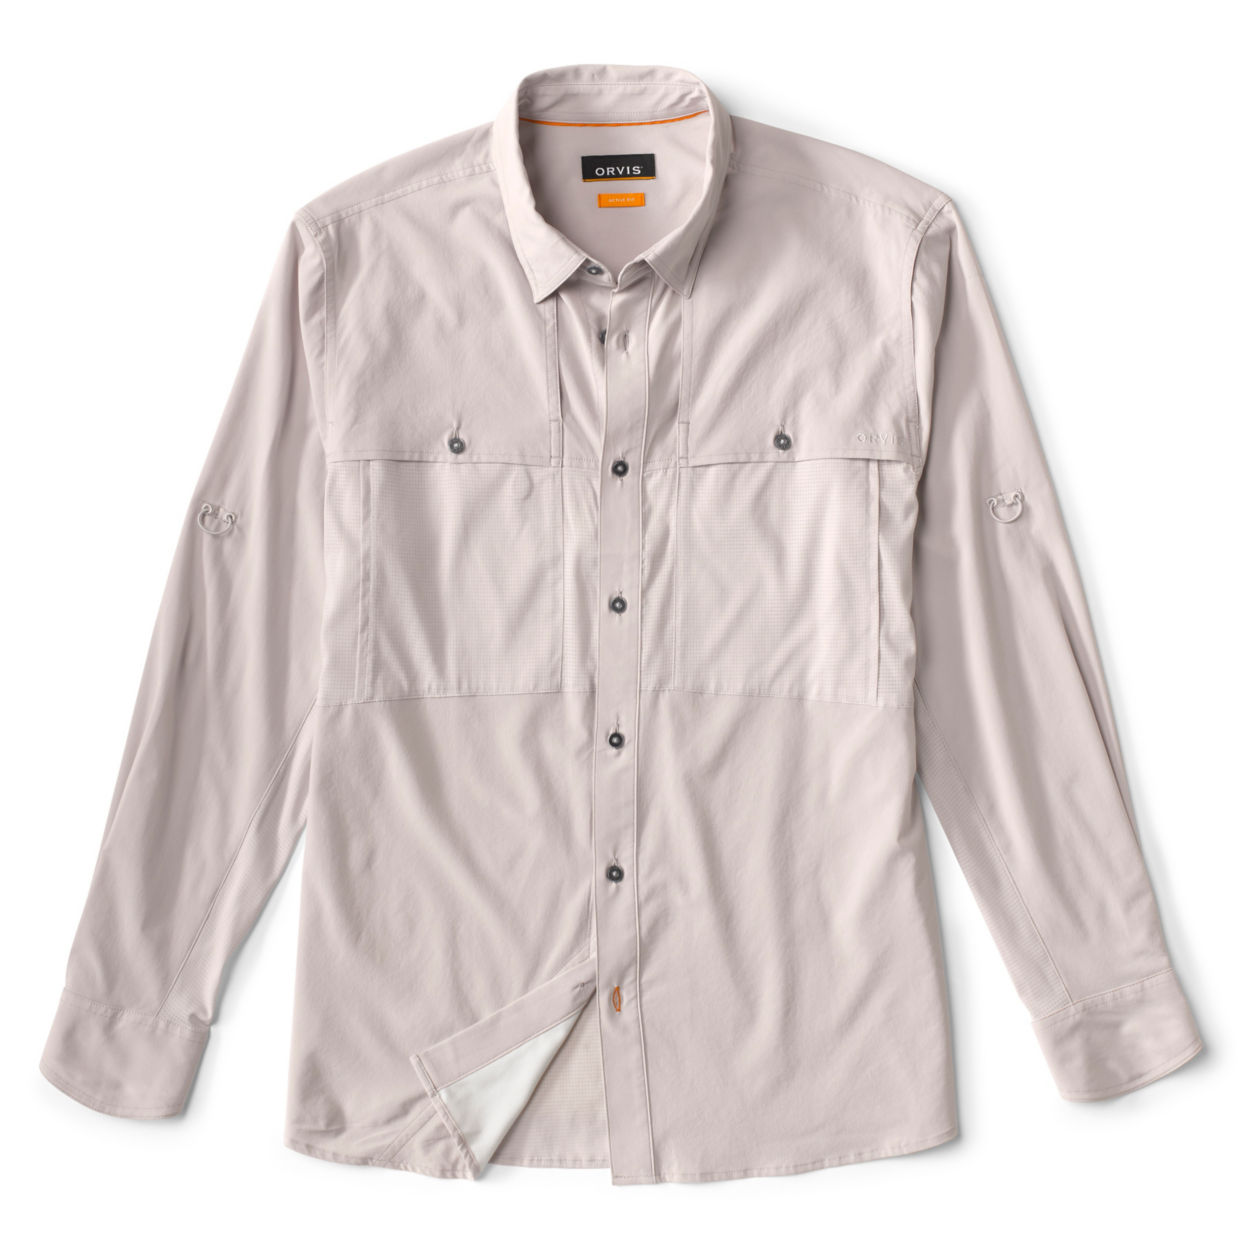 Men's Long-Sleeved Ventilated Open Air Casting Shirt Vapor Size Small Polyester/Recycled Materials Orvis